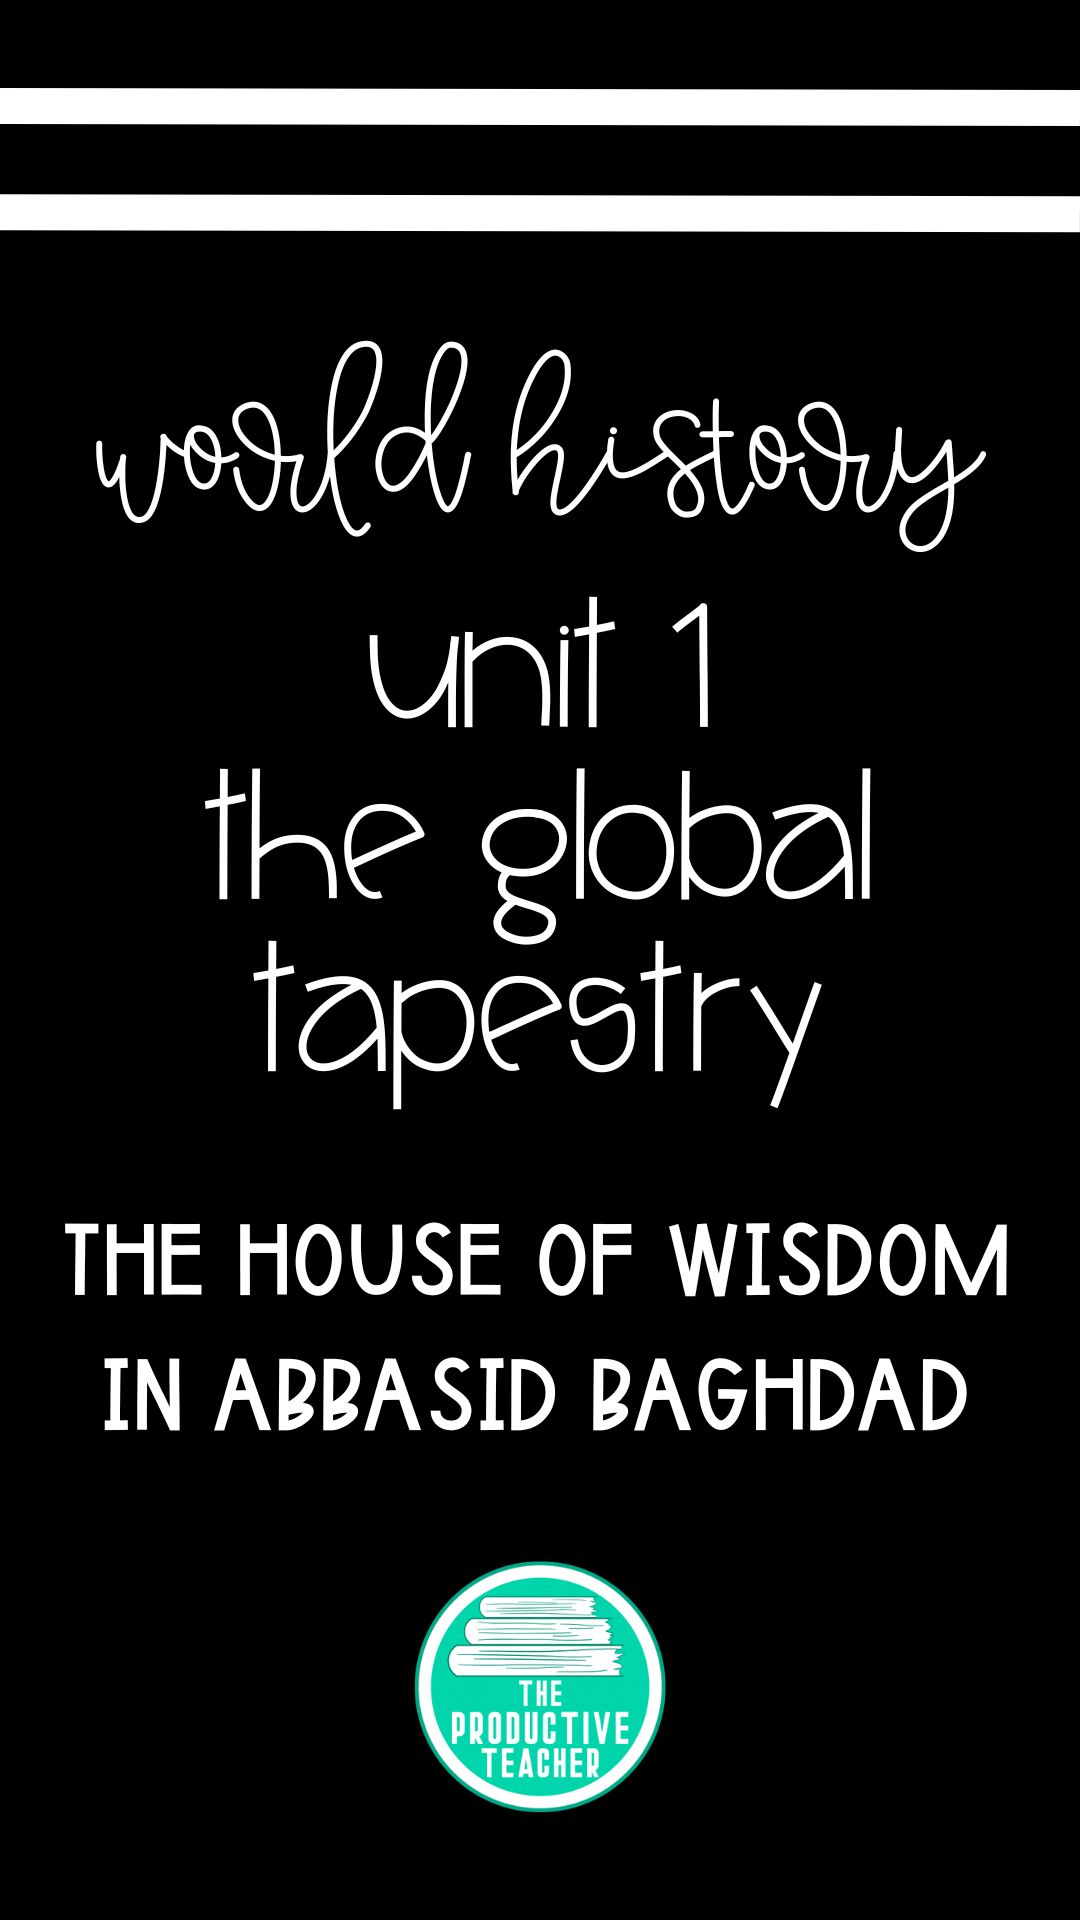 The House of Wisdom in Abbasid Baghdad